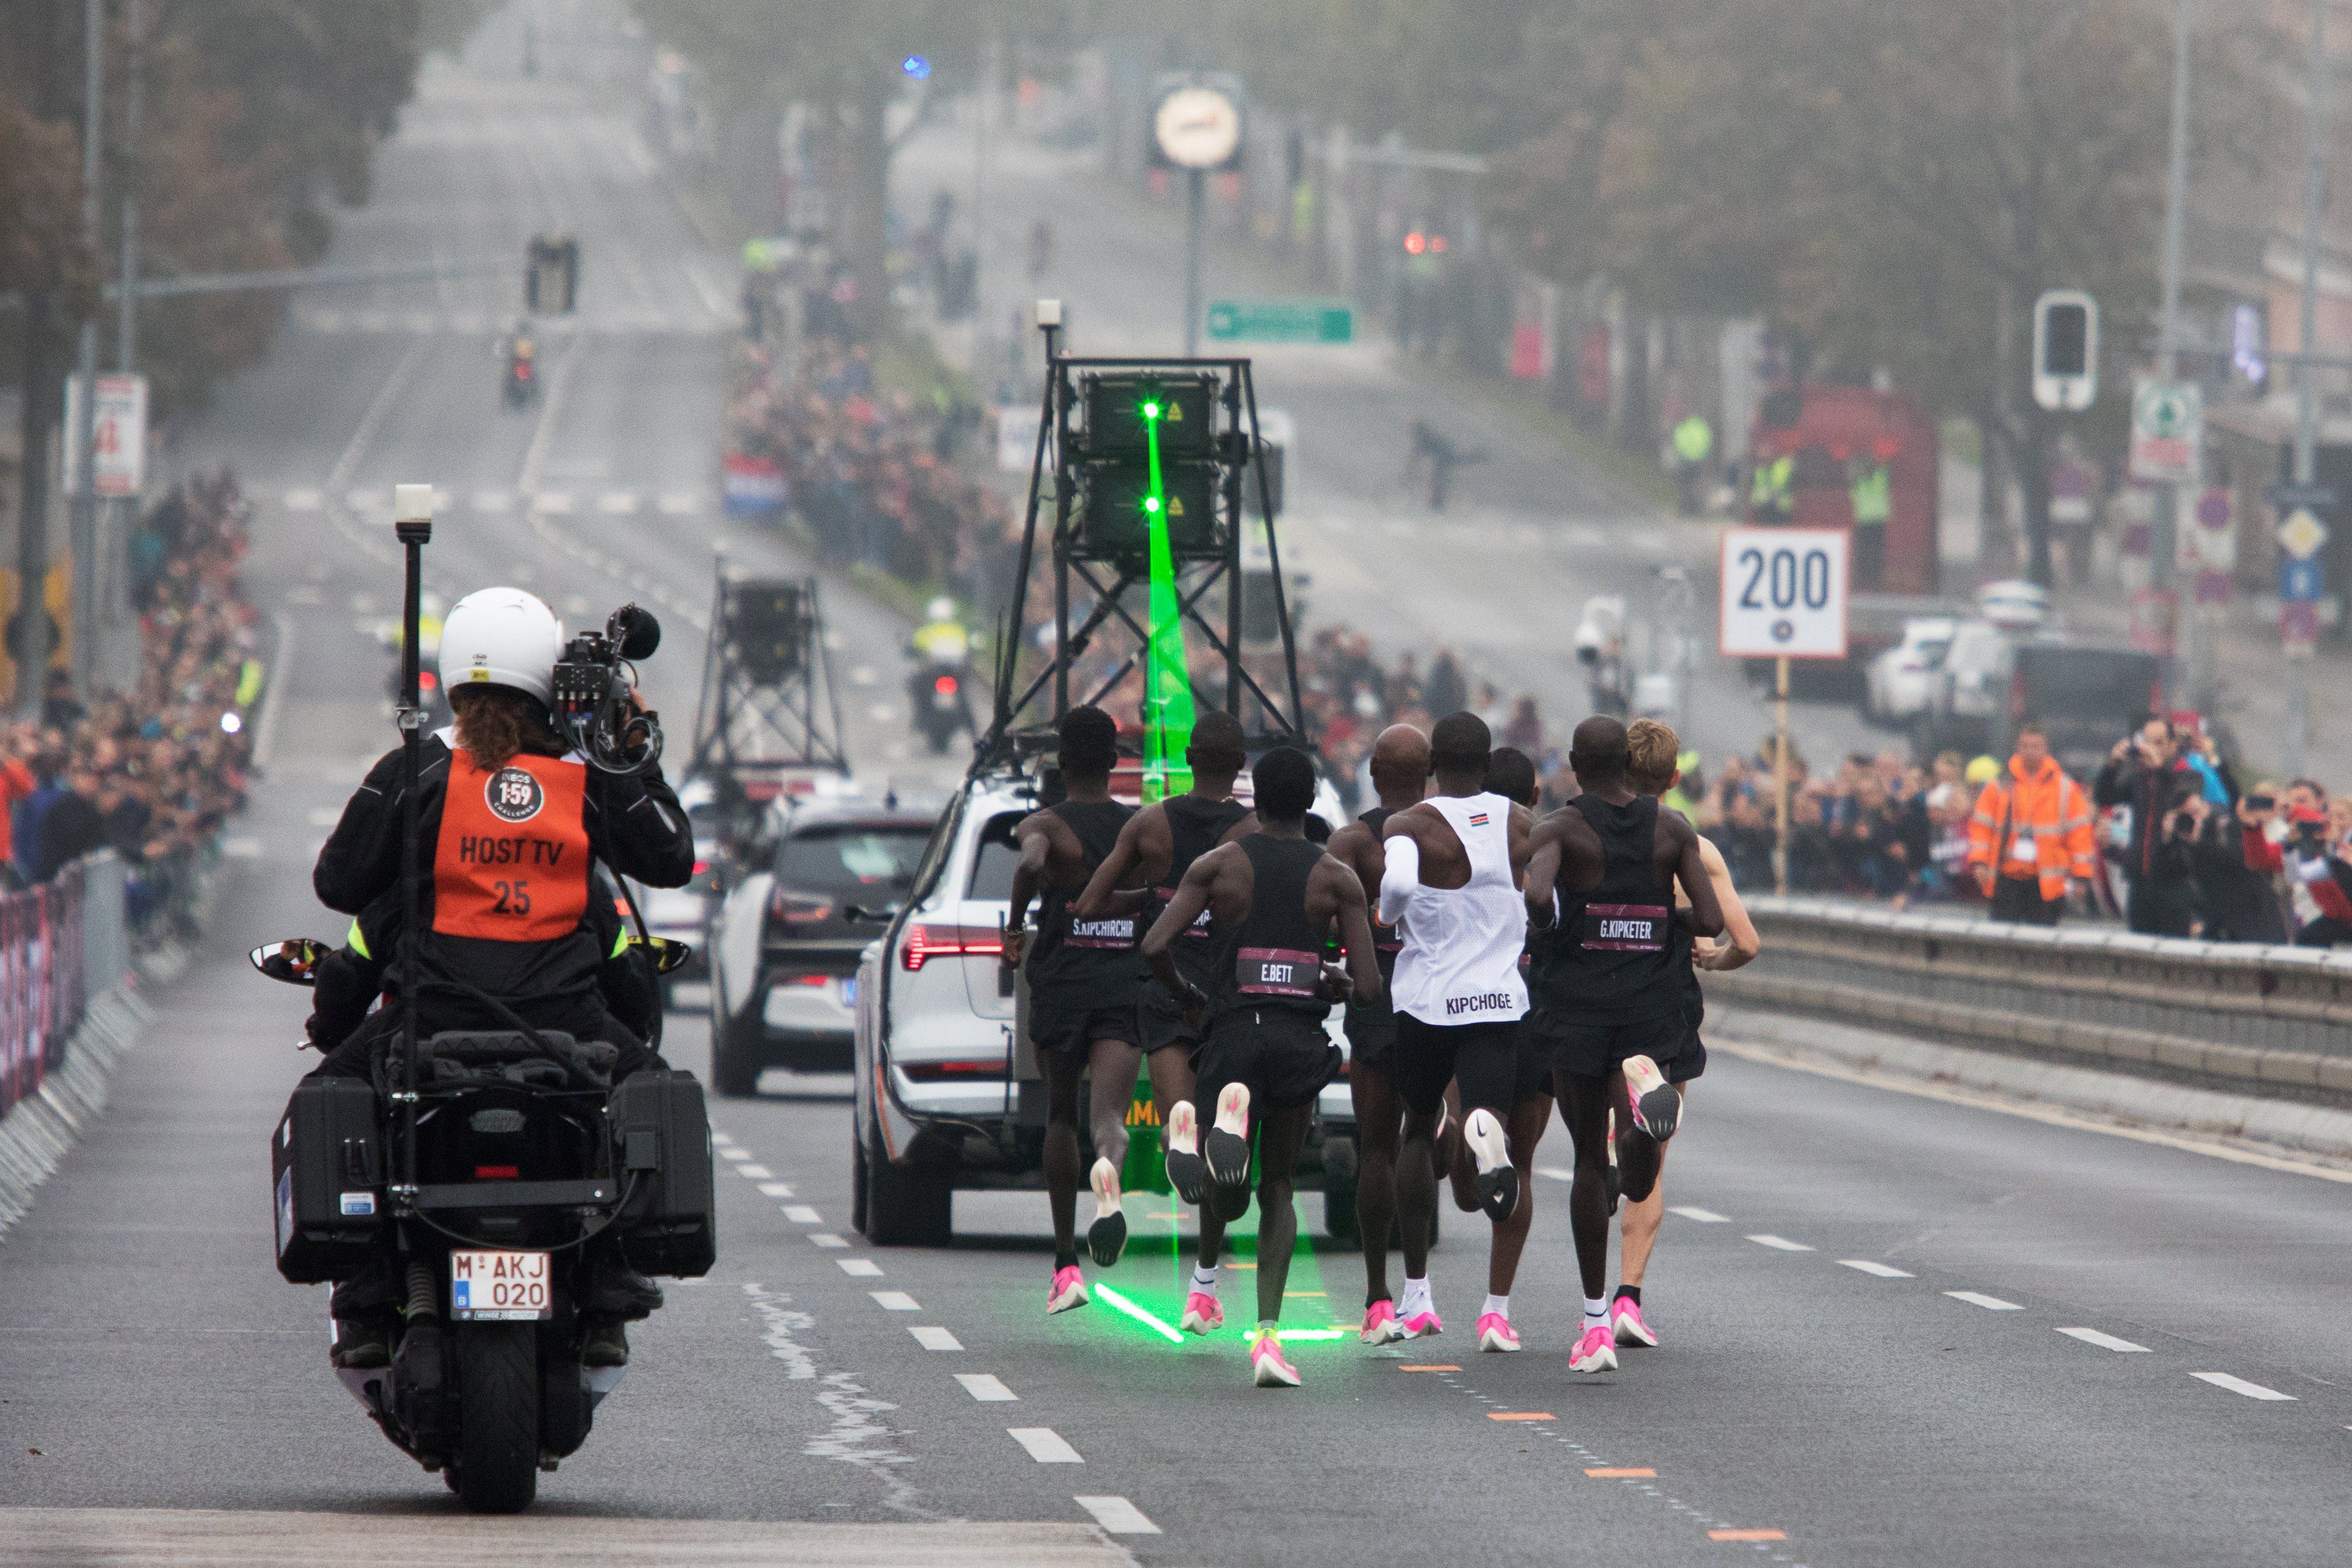 In this image, a group of runners run in close formation behind a car that shines a green laser onto the pavement.